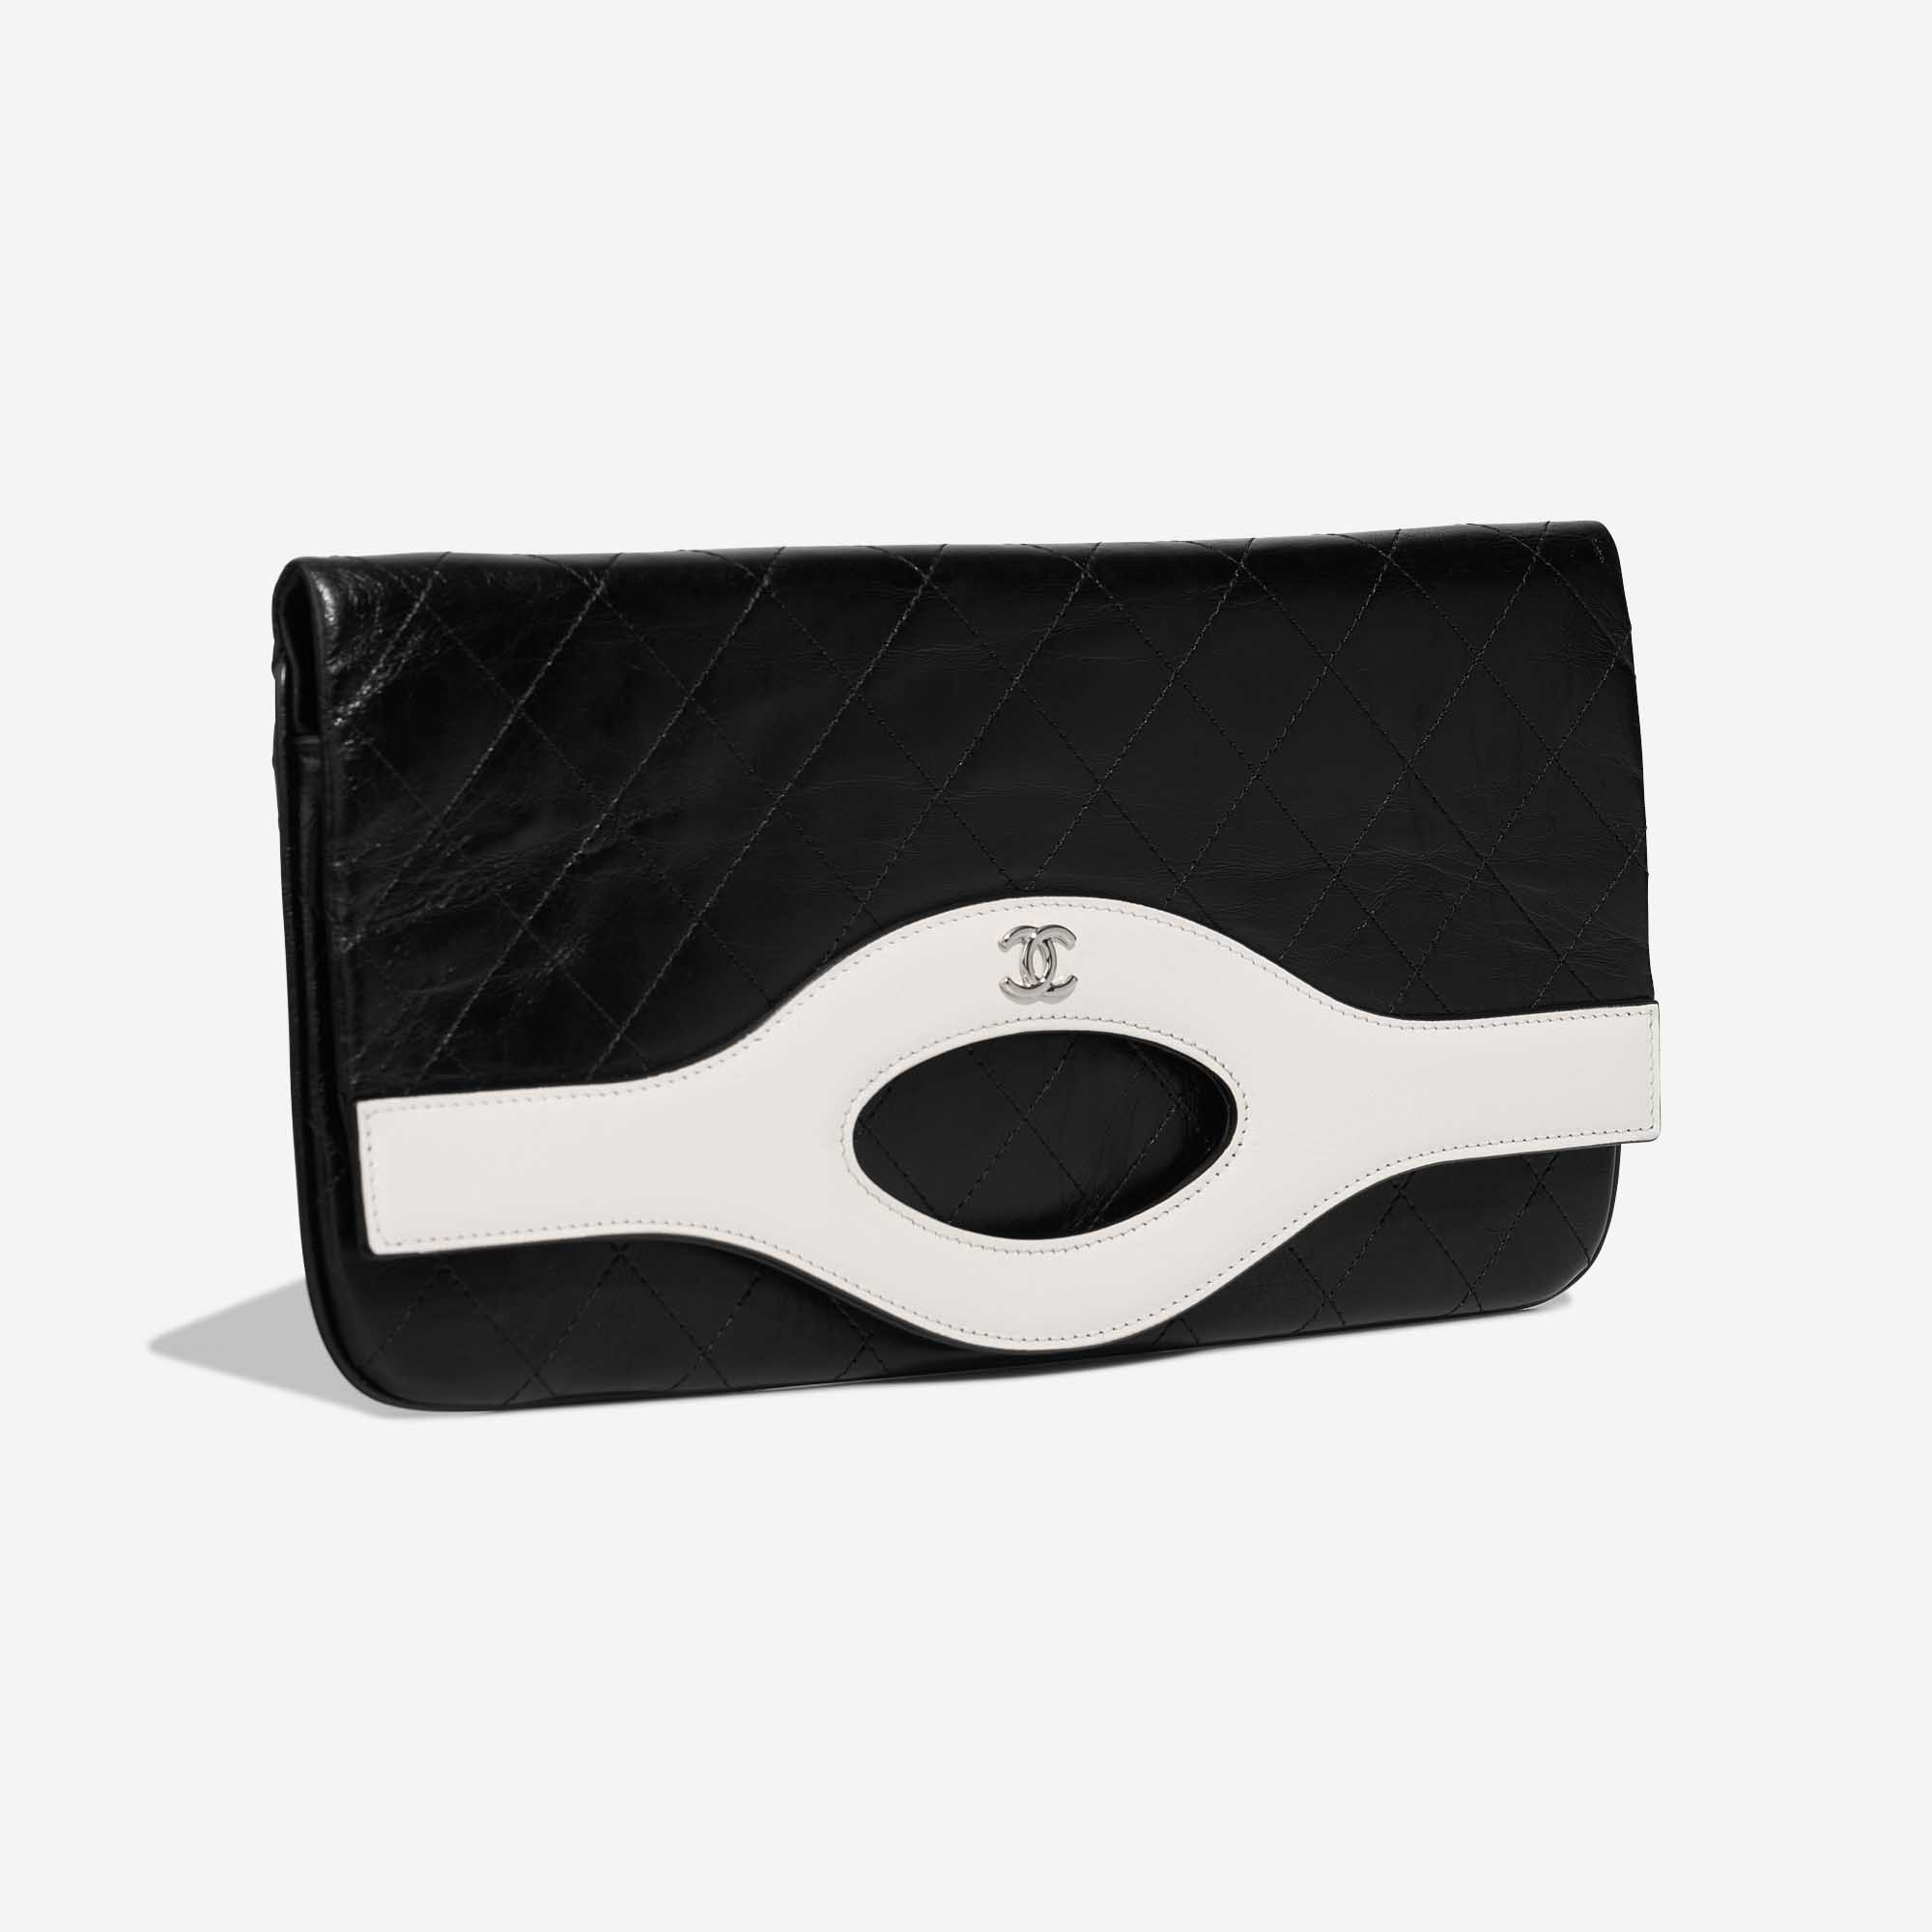 Chanel 31 Clutch Aged Calf Black / White | Sell your designer bag